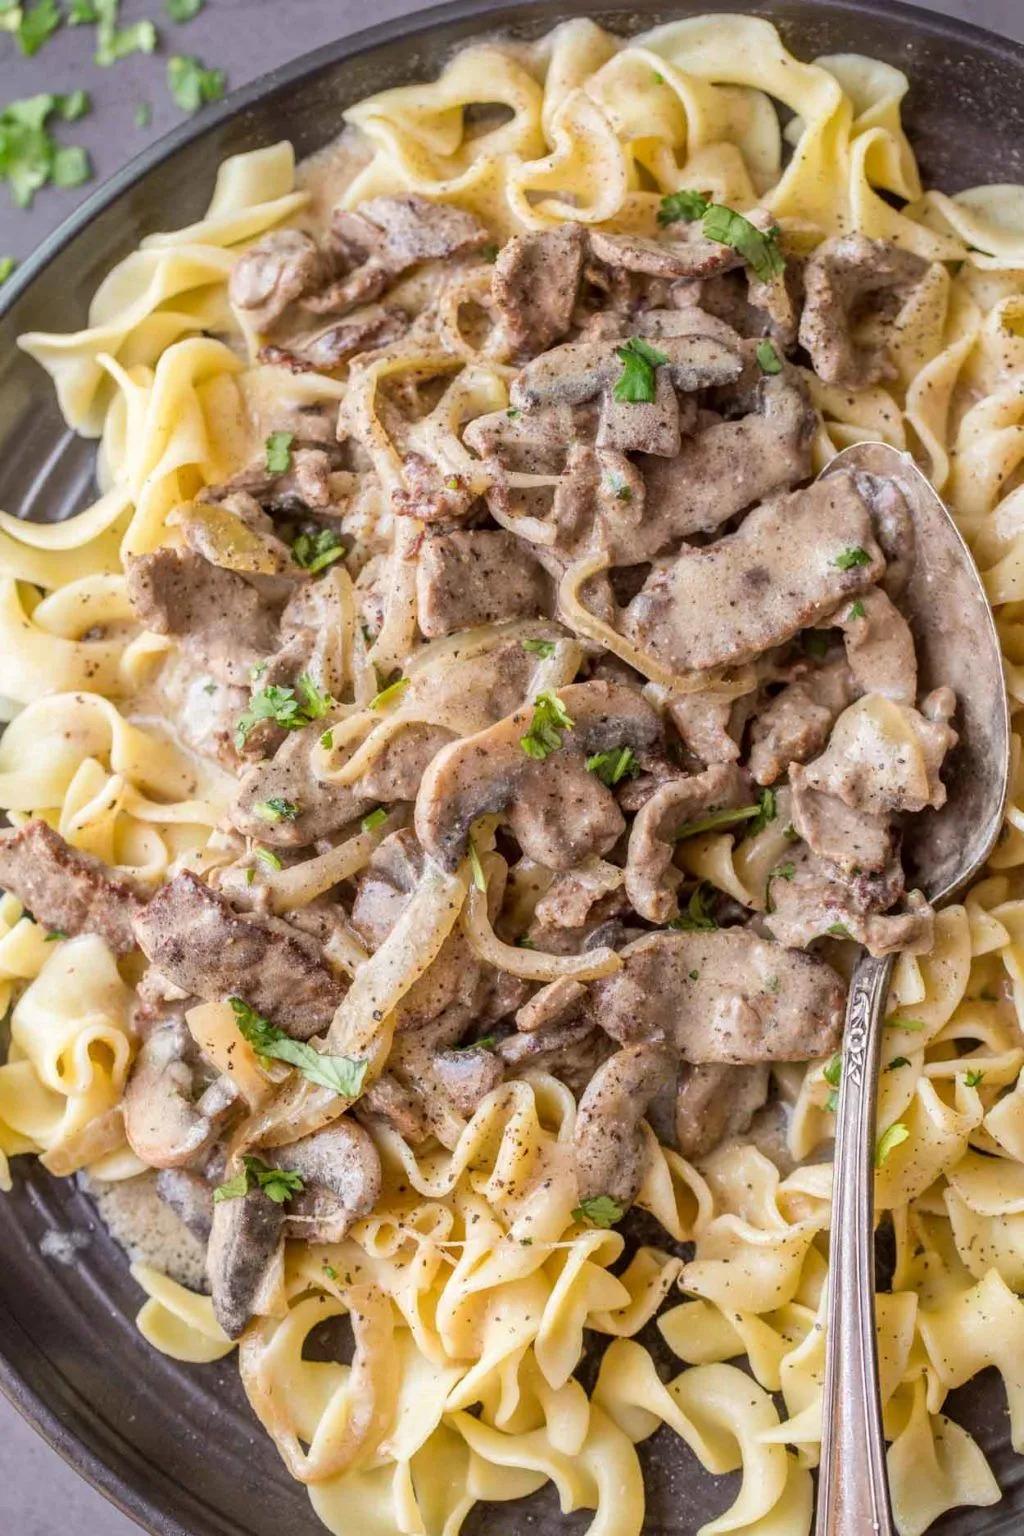 How To Make Beef Stroganoff: A Classic Russian Dish – Euro Food Seattle